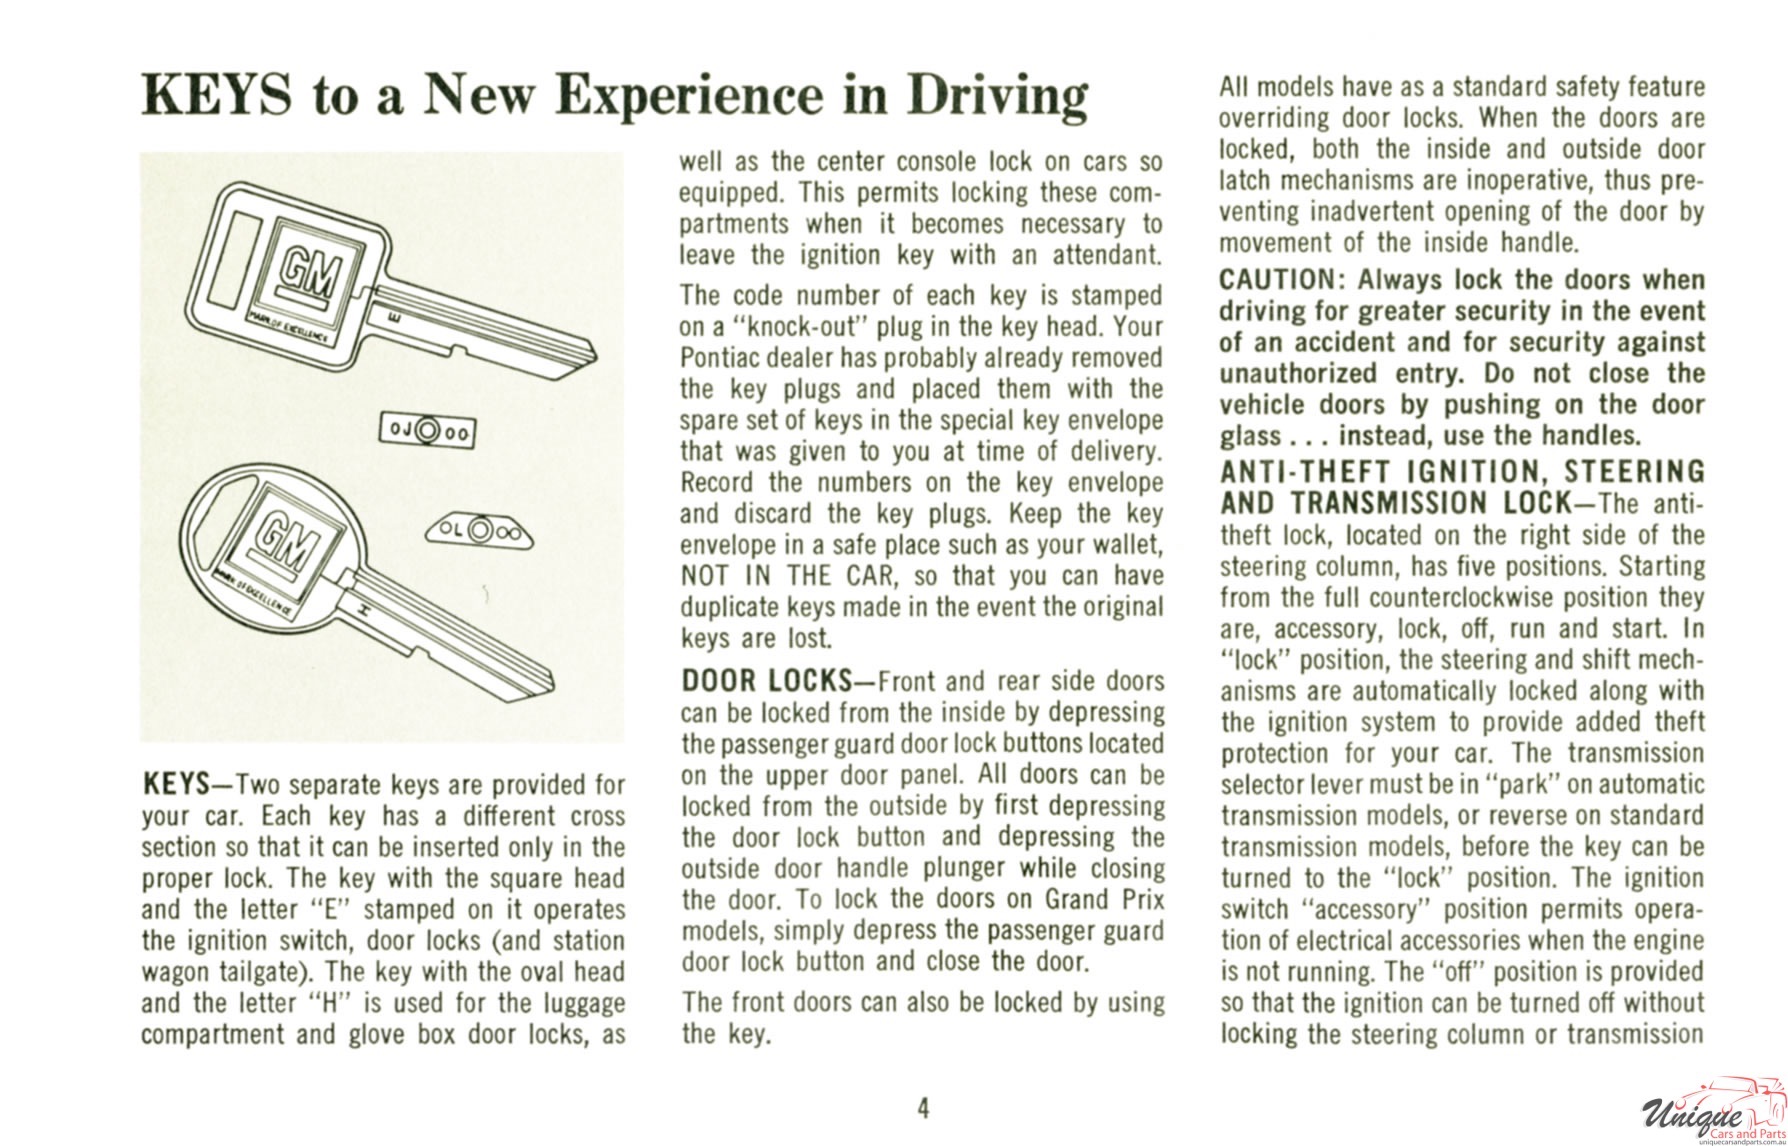 1969 Pontiac Owners Manual Page 28